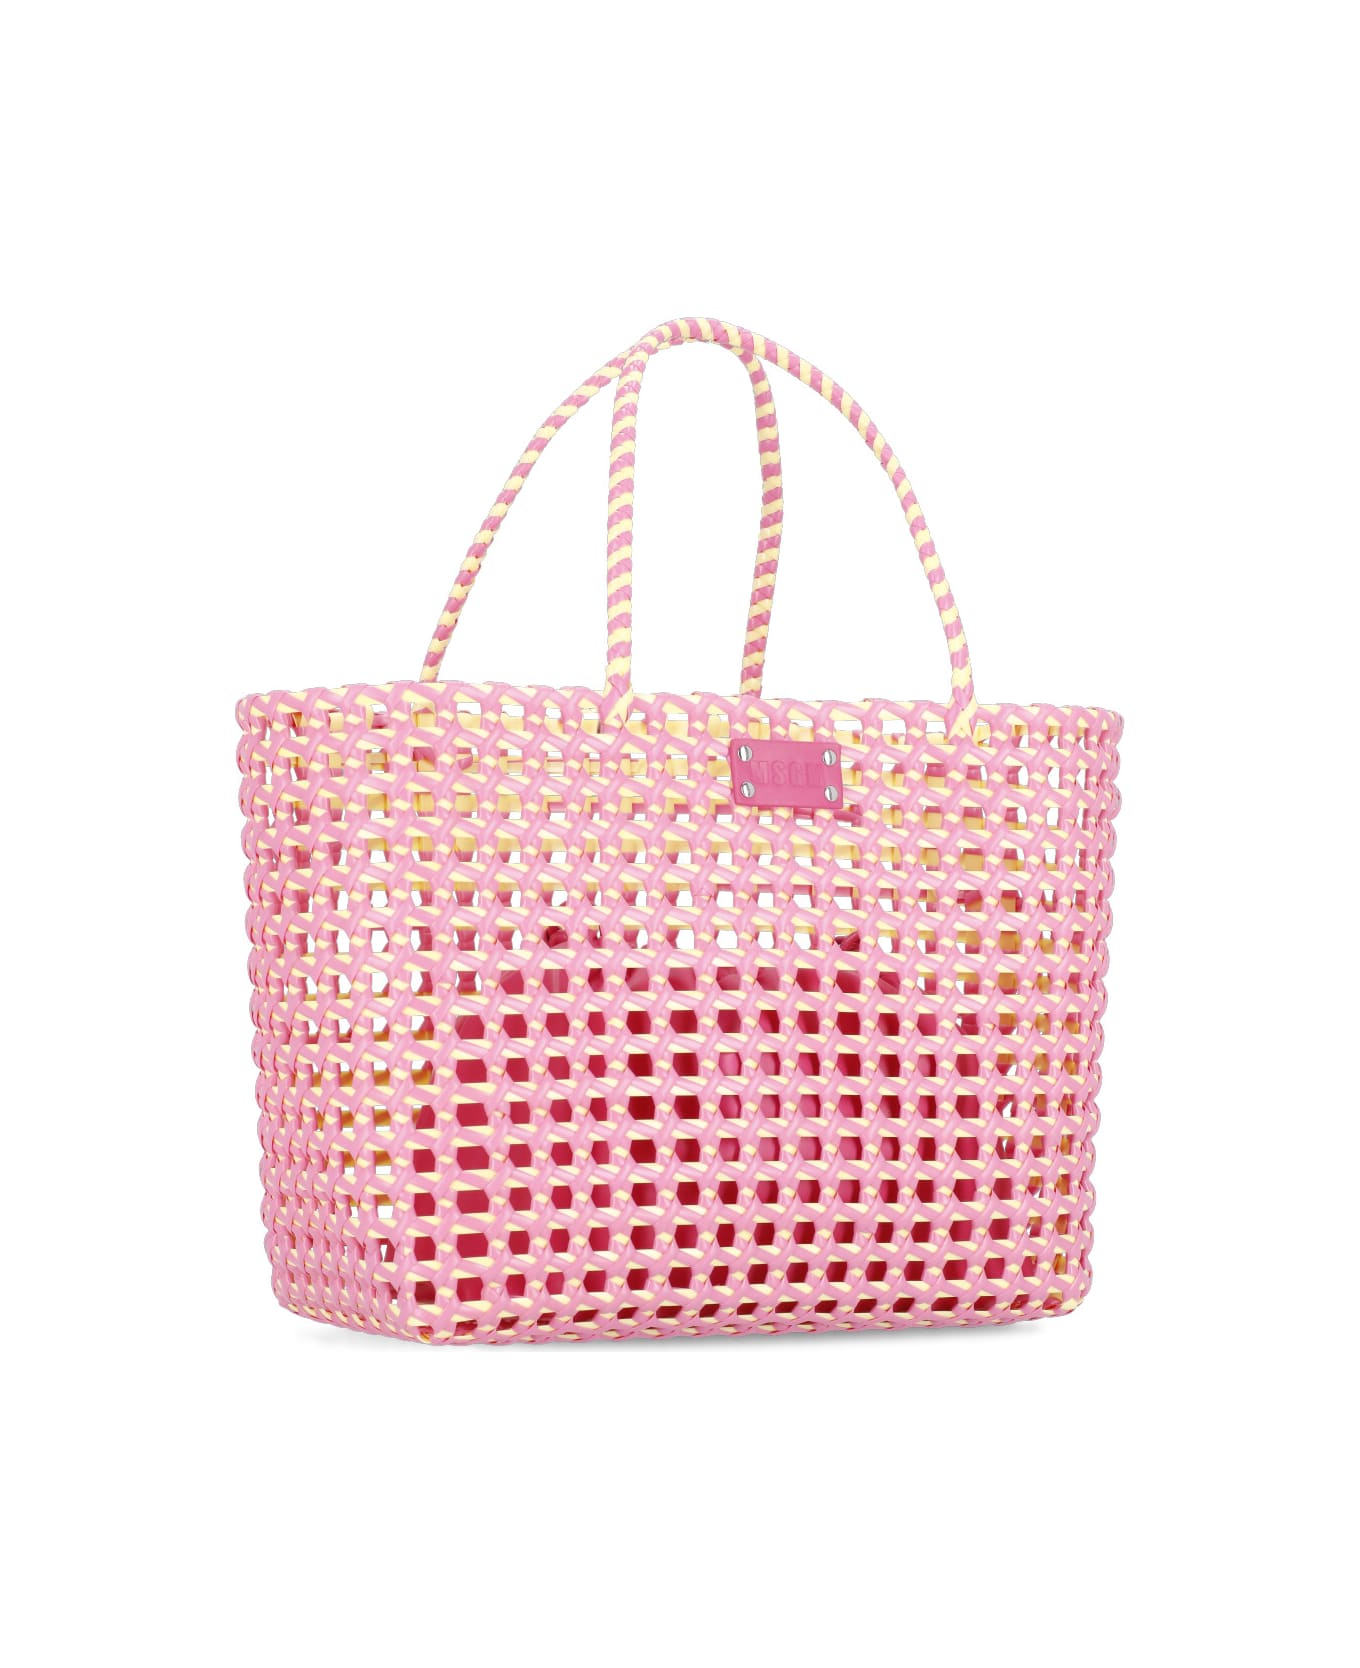 MSGM Maxi Tote Woven Bag - Pink